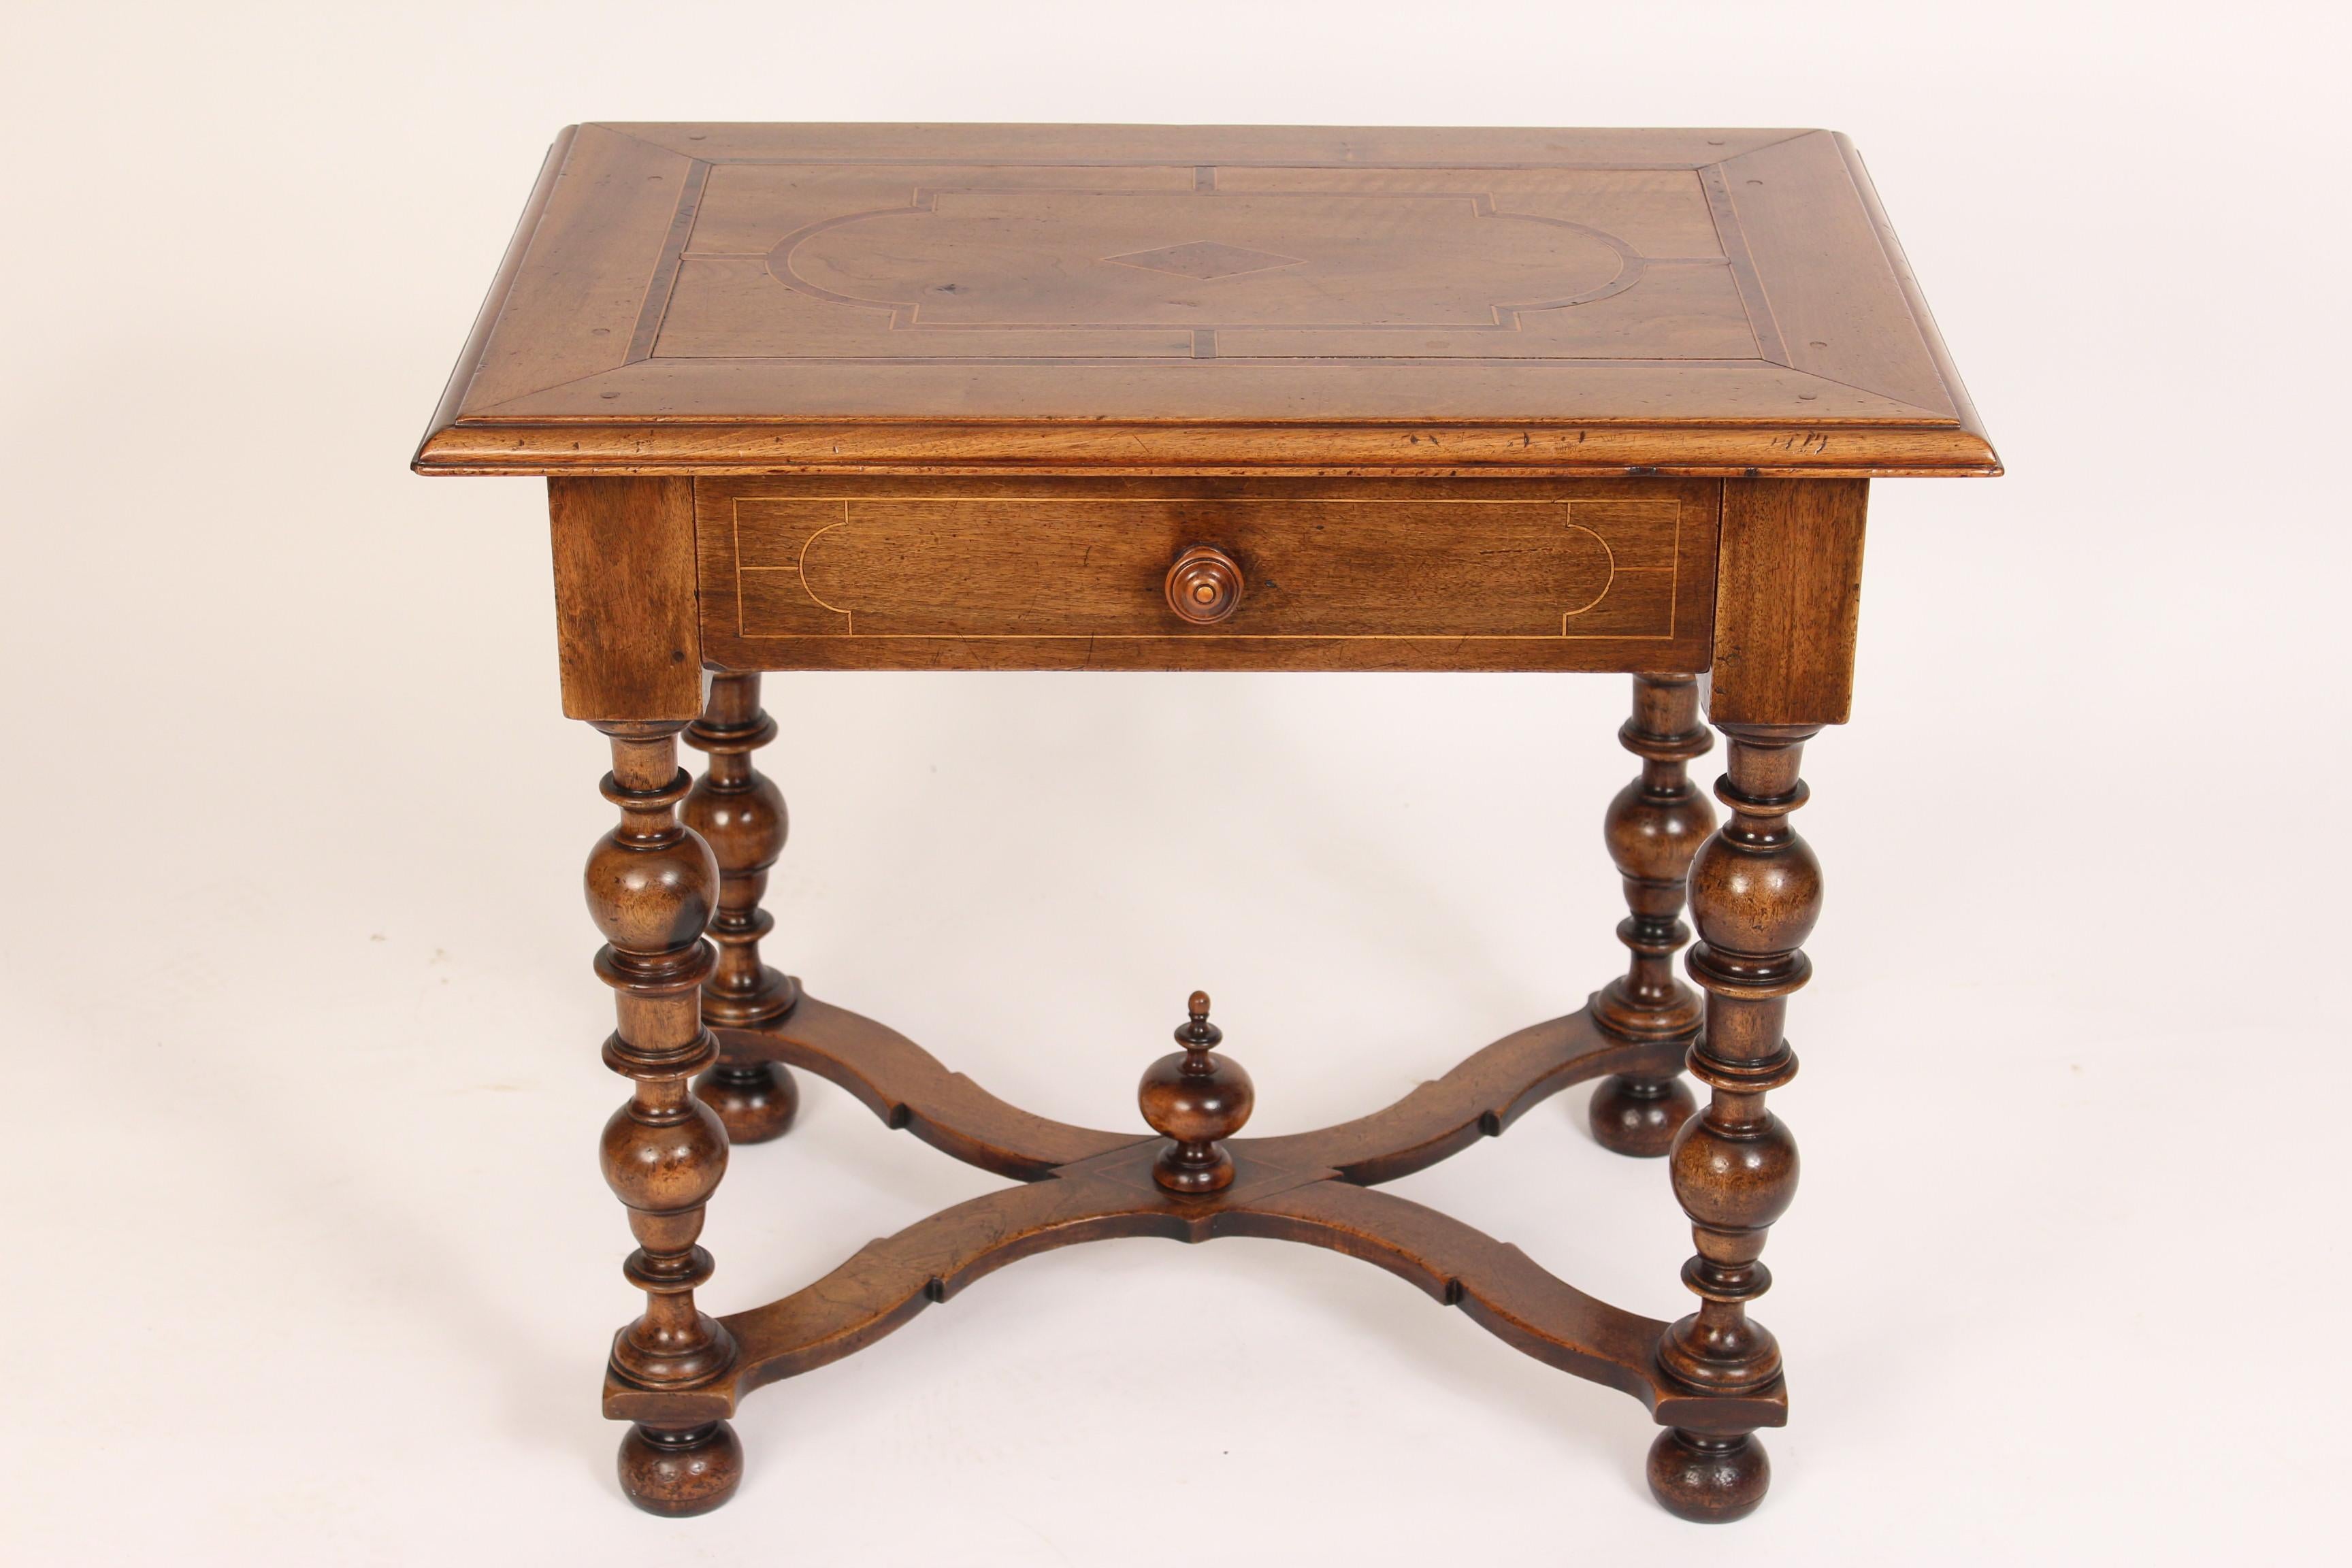 Antique Louis XIV style walnut occasional table, 19th century. With an inlaid top, X-shaped stretcher bar, turned legs and dovetail construction on the drawer.